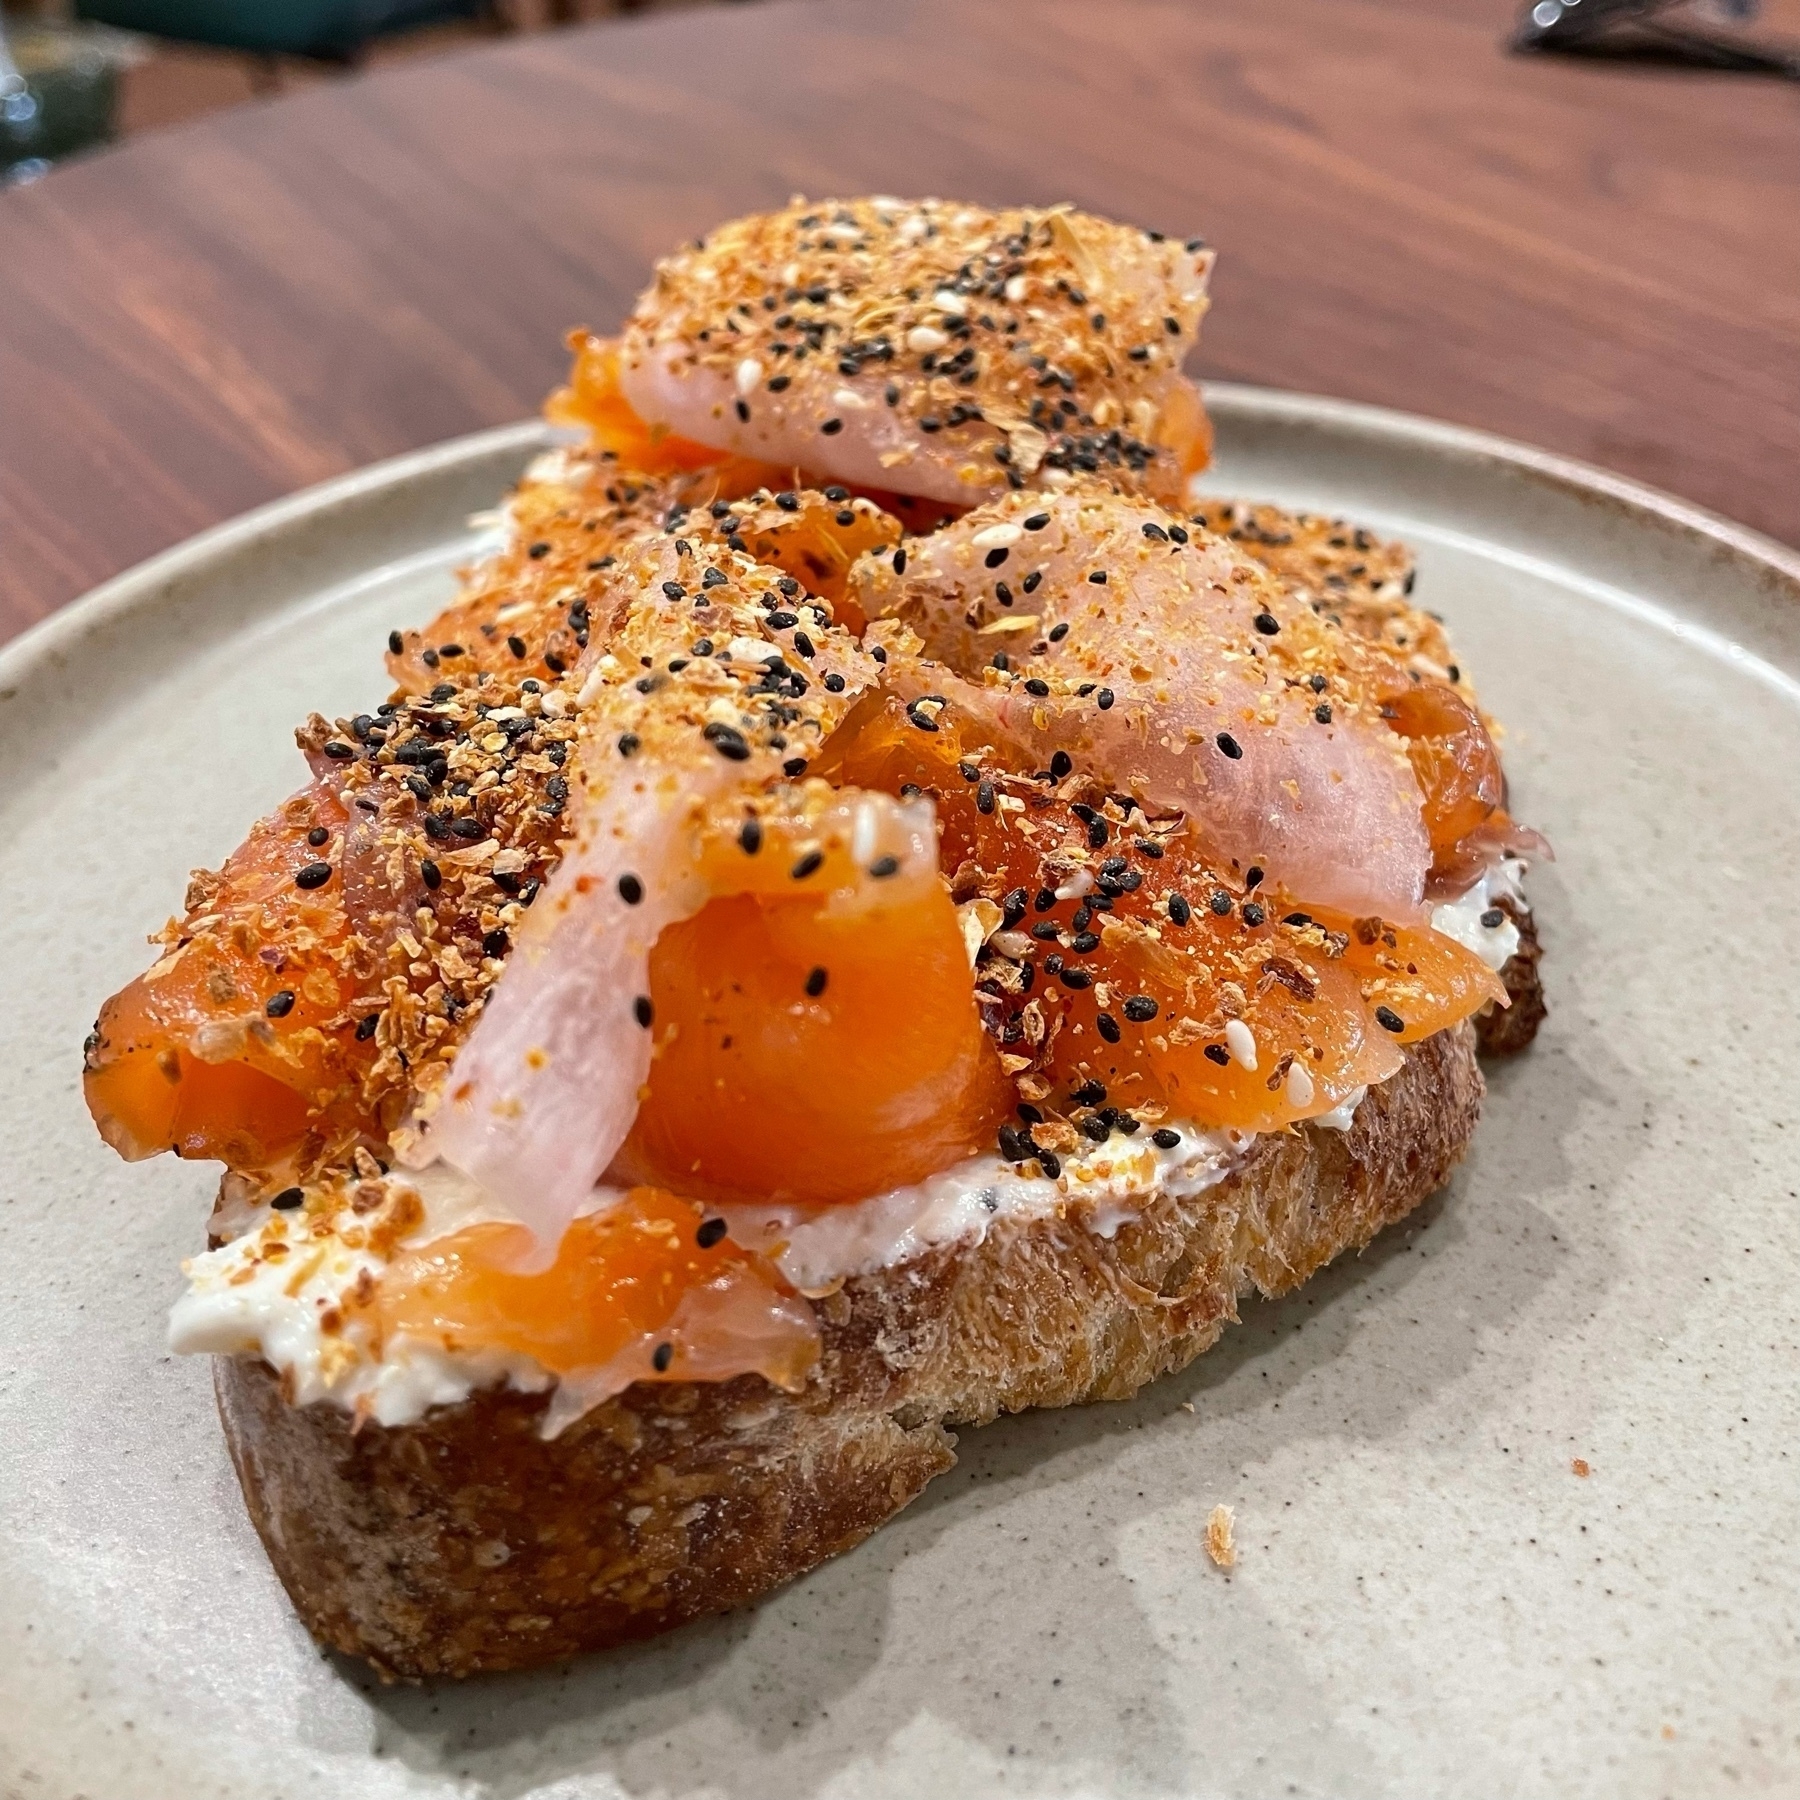 Lox and radish on labneh and sourdough, with a sprinkle of various seeds on top.